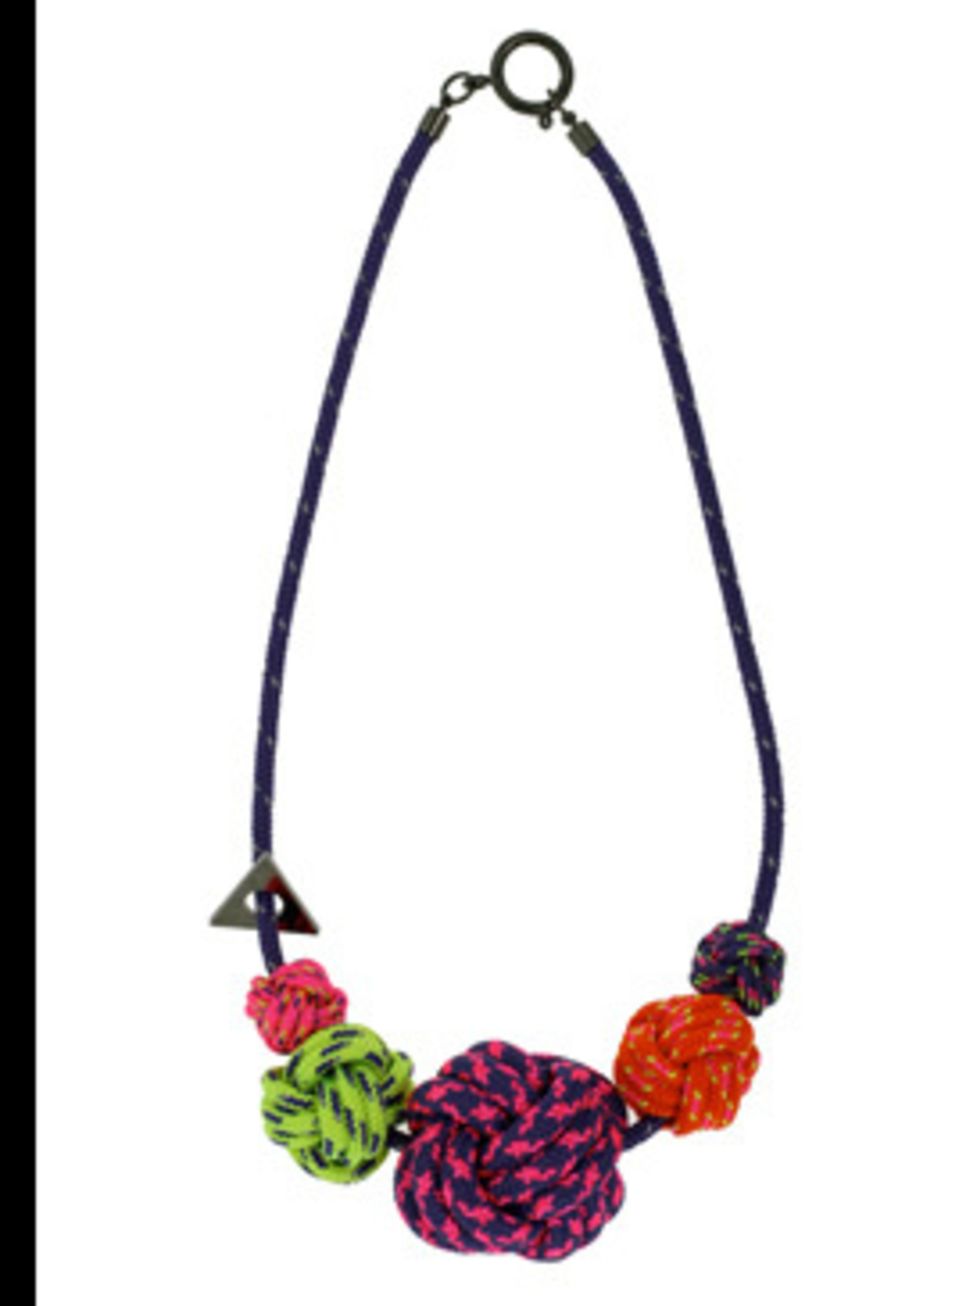 <p>Necklace, £140 by Lanyard at <a href="http://www.kabiri.co.uk/jewellery/necklaces/five_knot_necklacepurple">Kabiri</a></p>